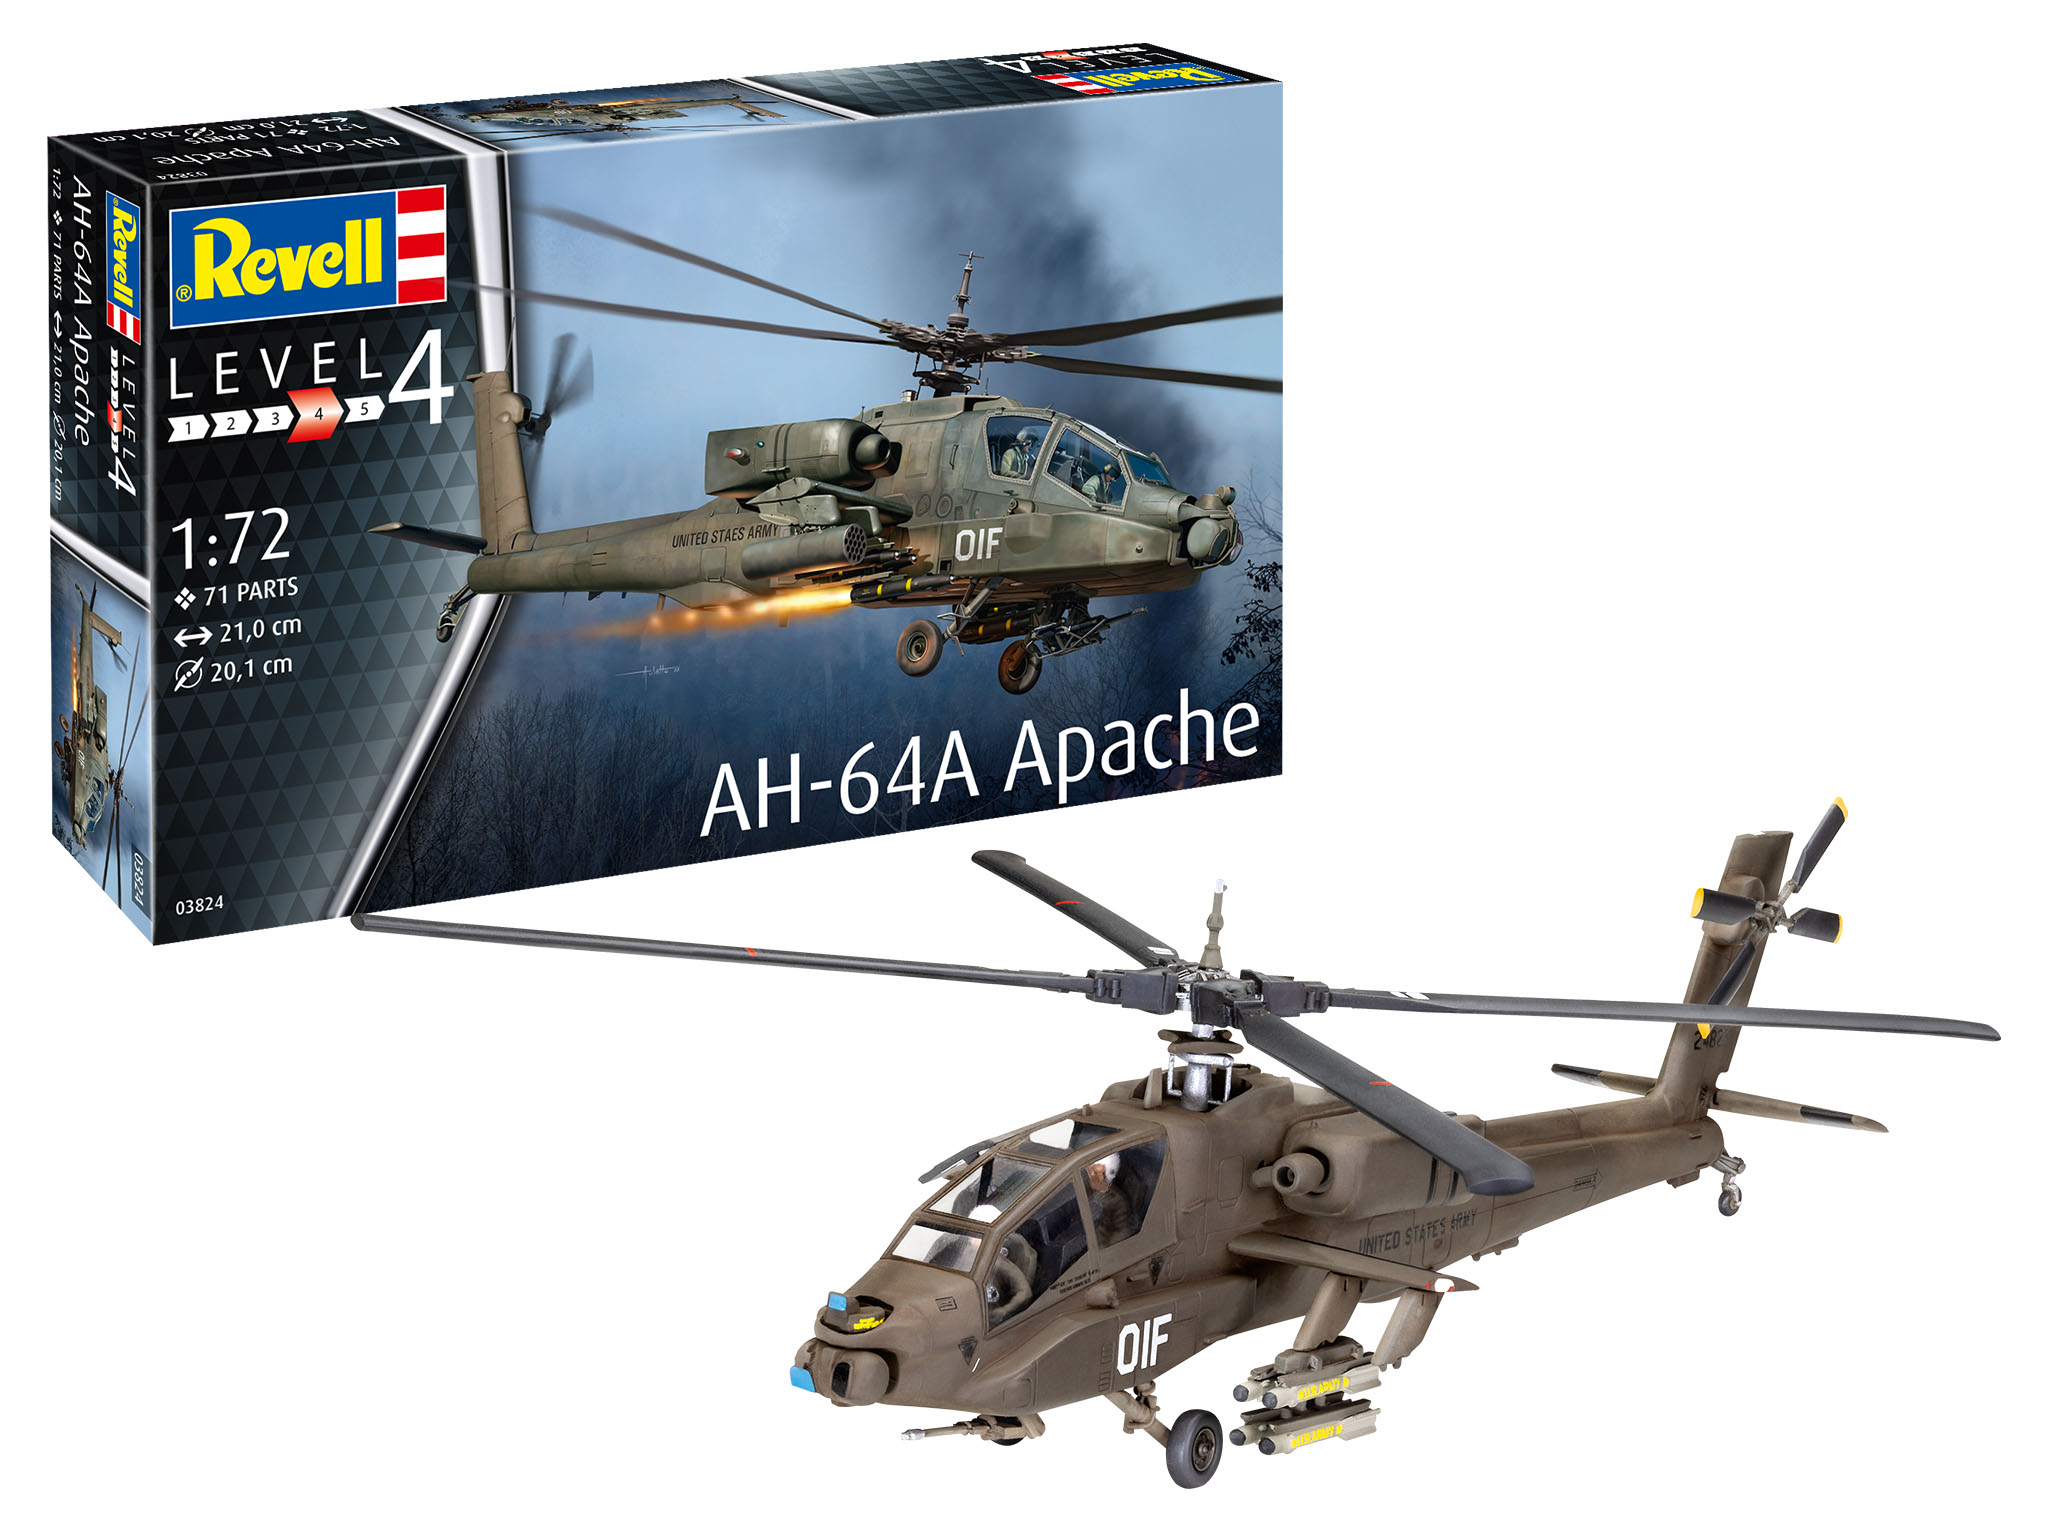 revell-03824-AH-64A-Apache-Helikopter